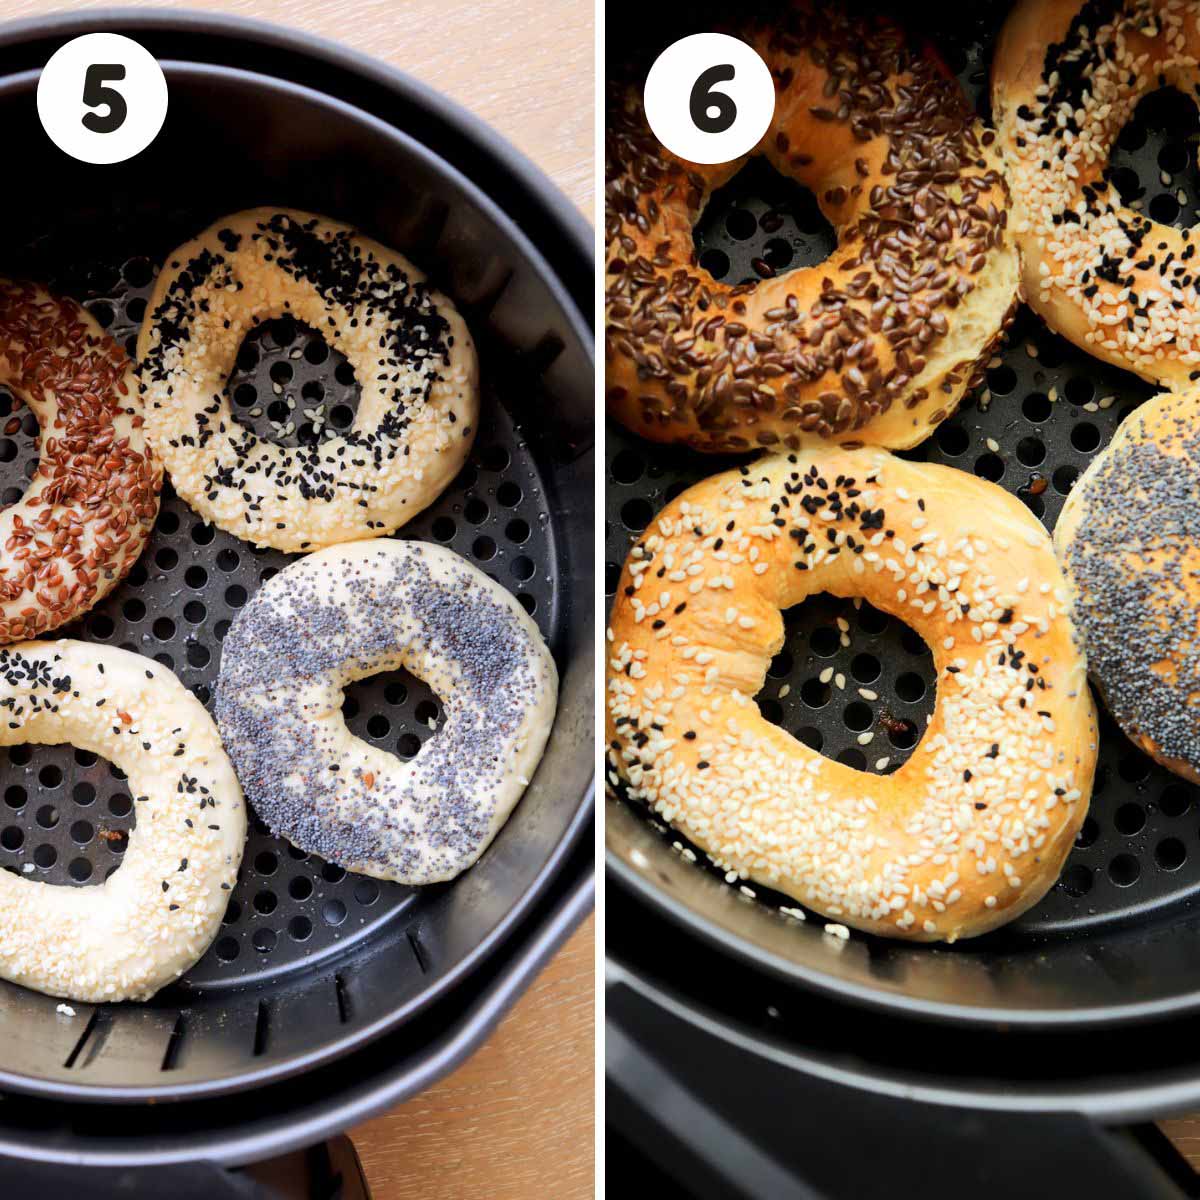 Steps to air fry the bagels.